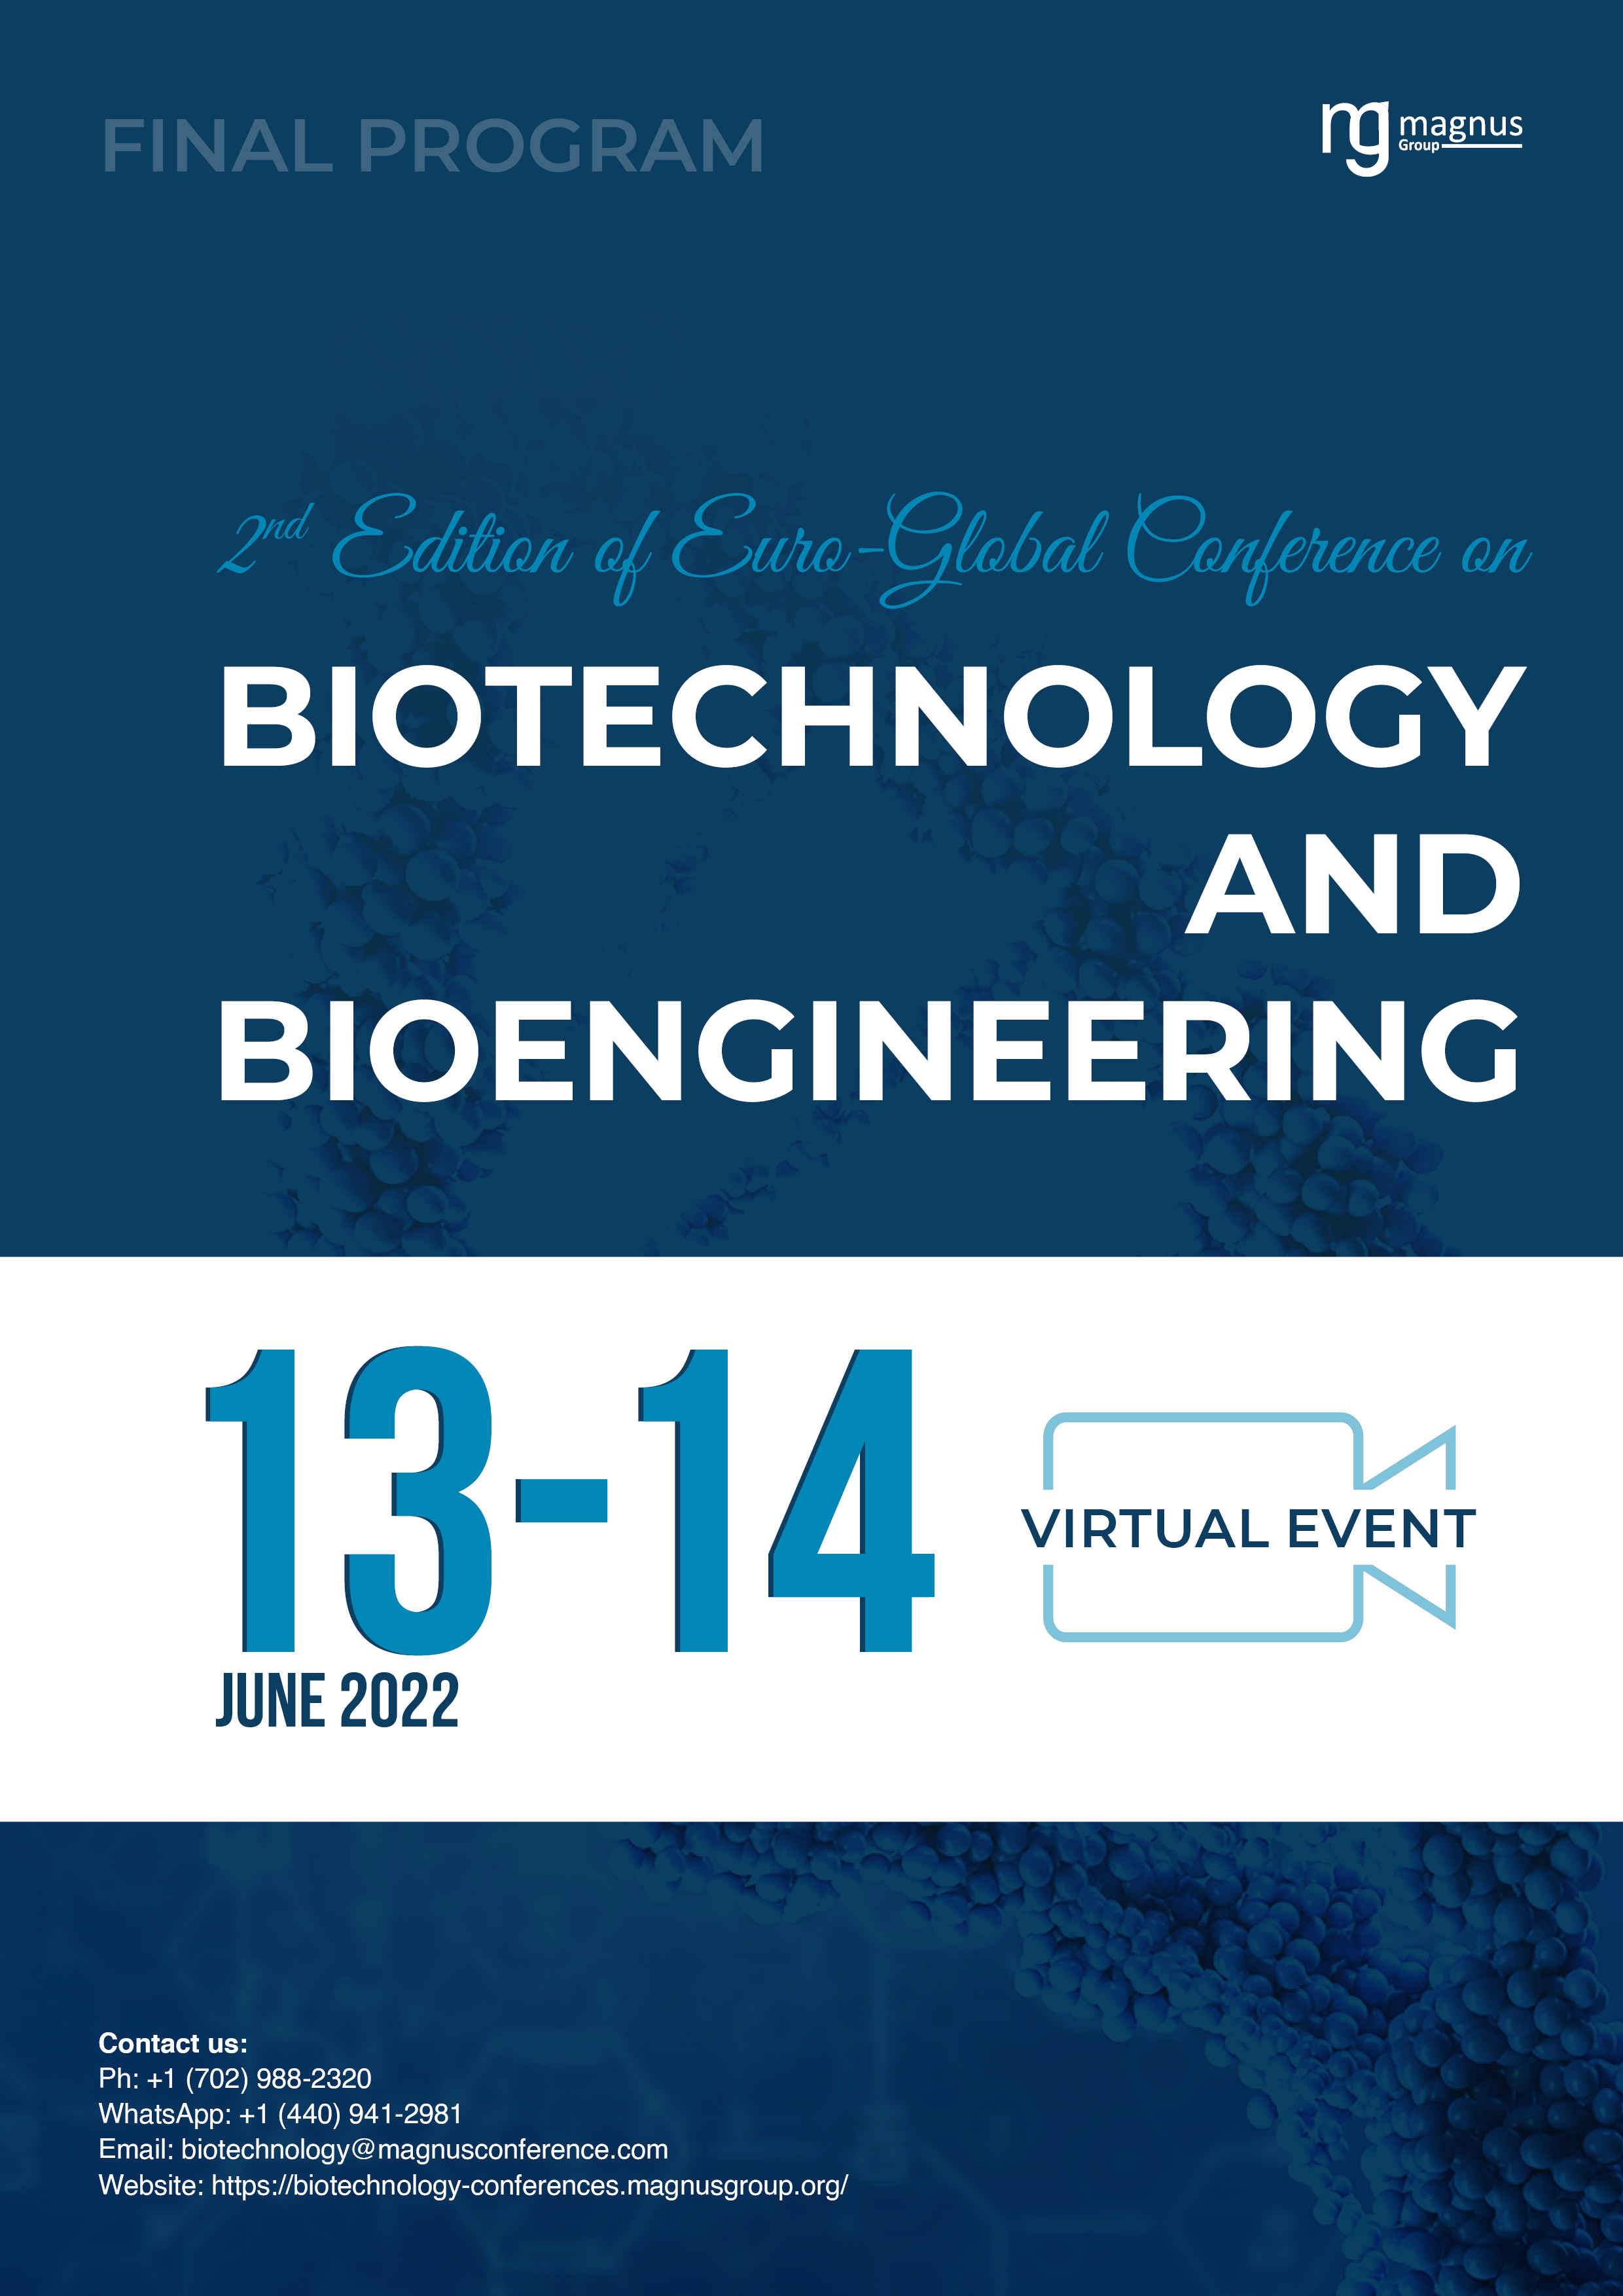 2nd Edition of Euro-Global Conference on Biotechnology and Bioengineering | Online Event Program